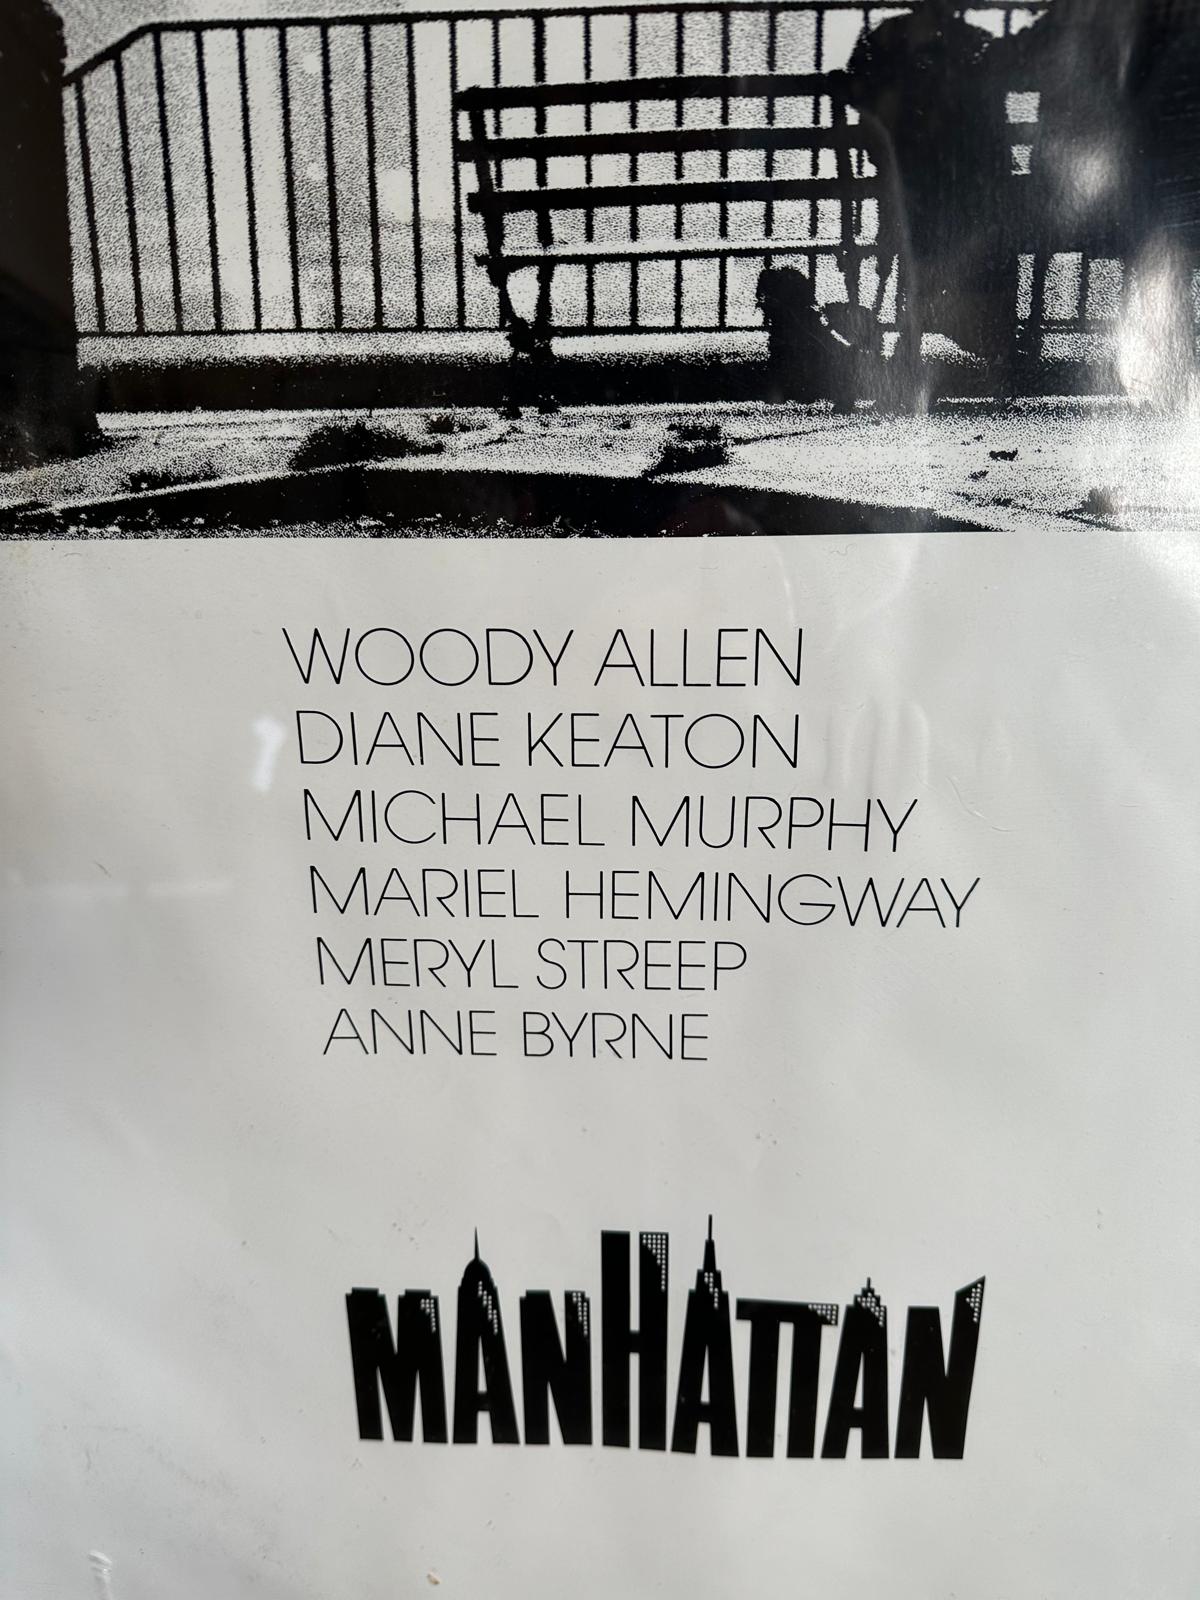 A vintage poster from the Woody Allen film Manhattan - Image 2 of 4